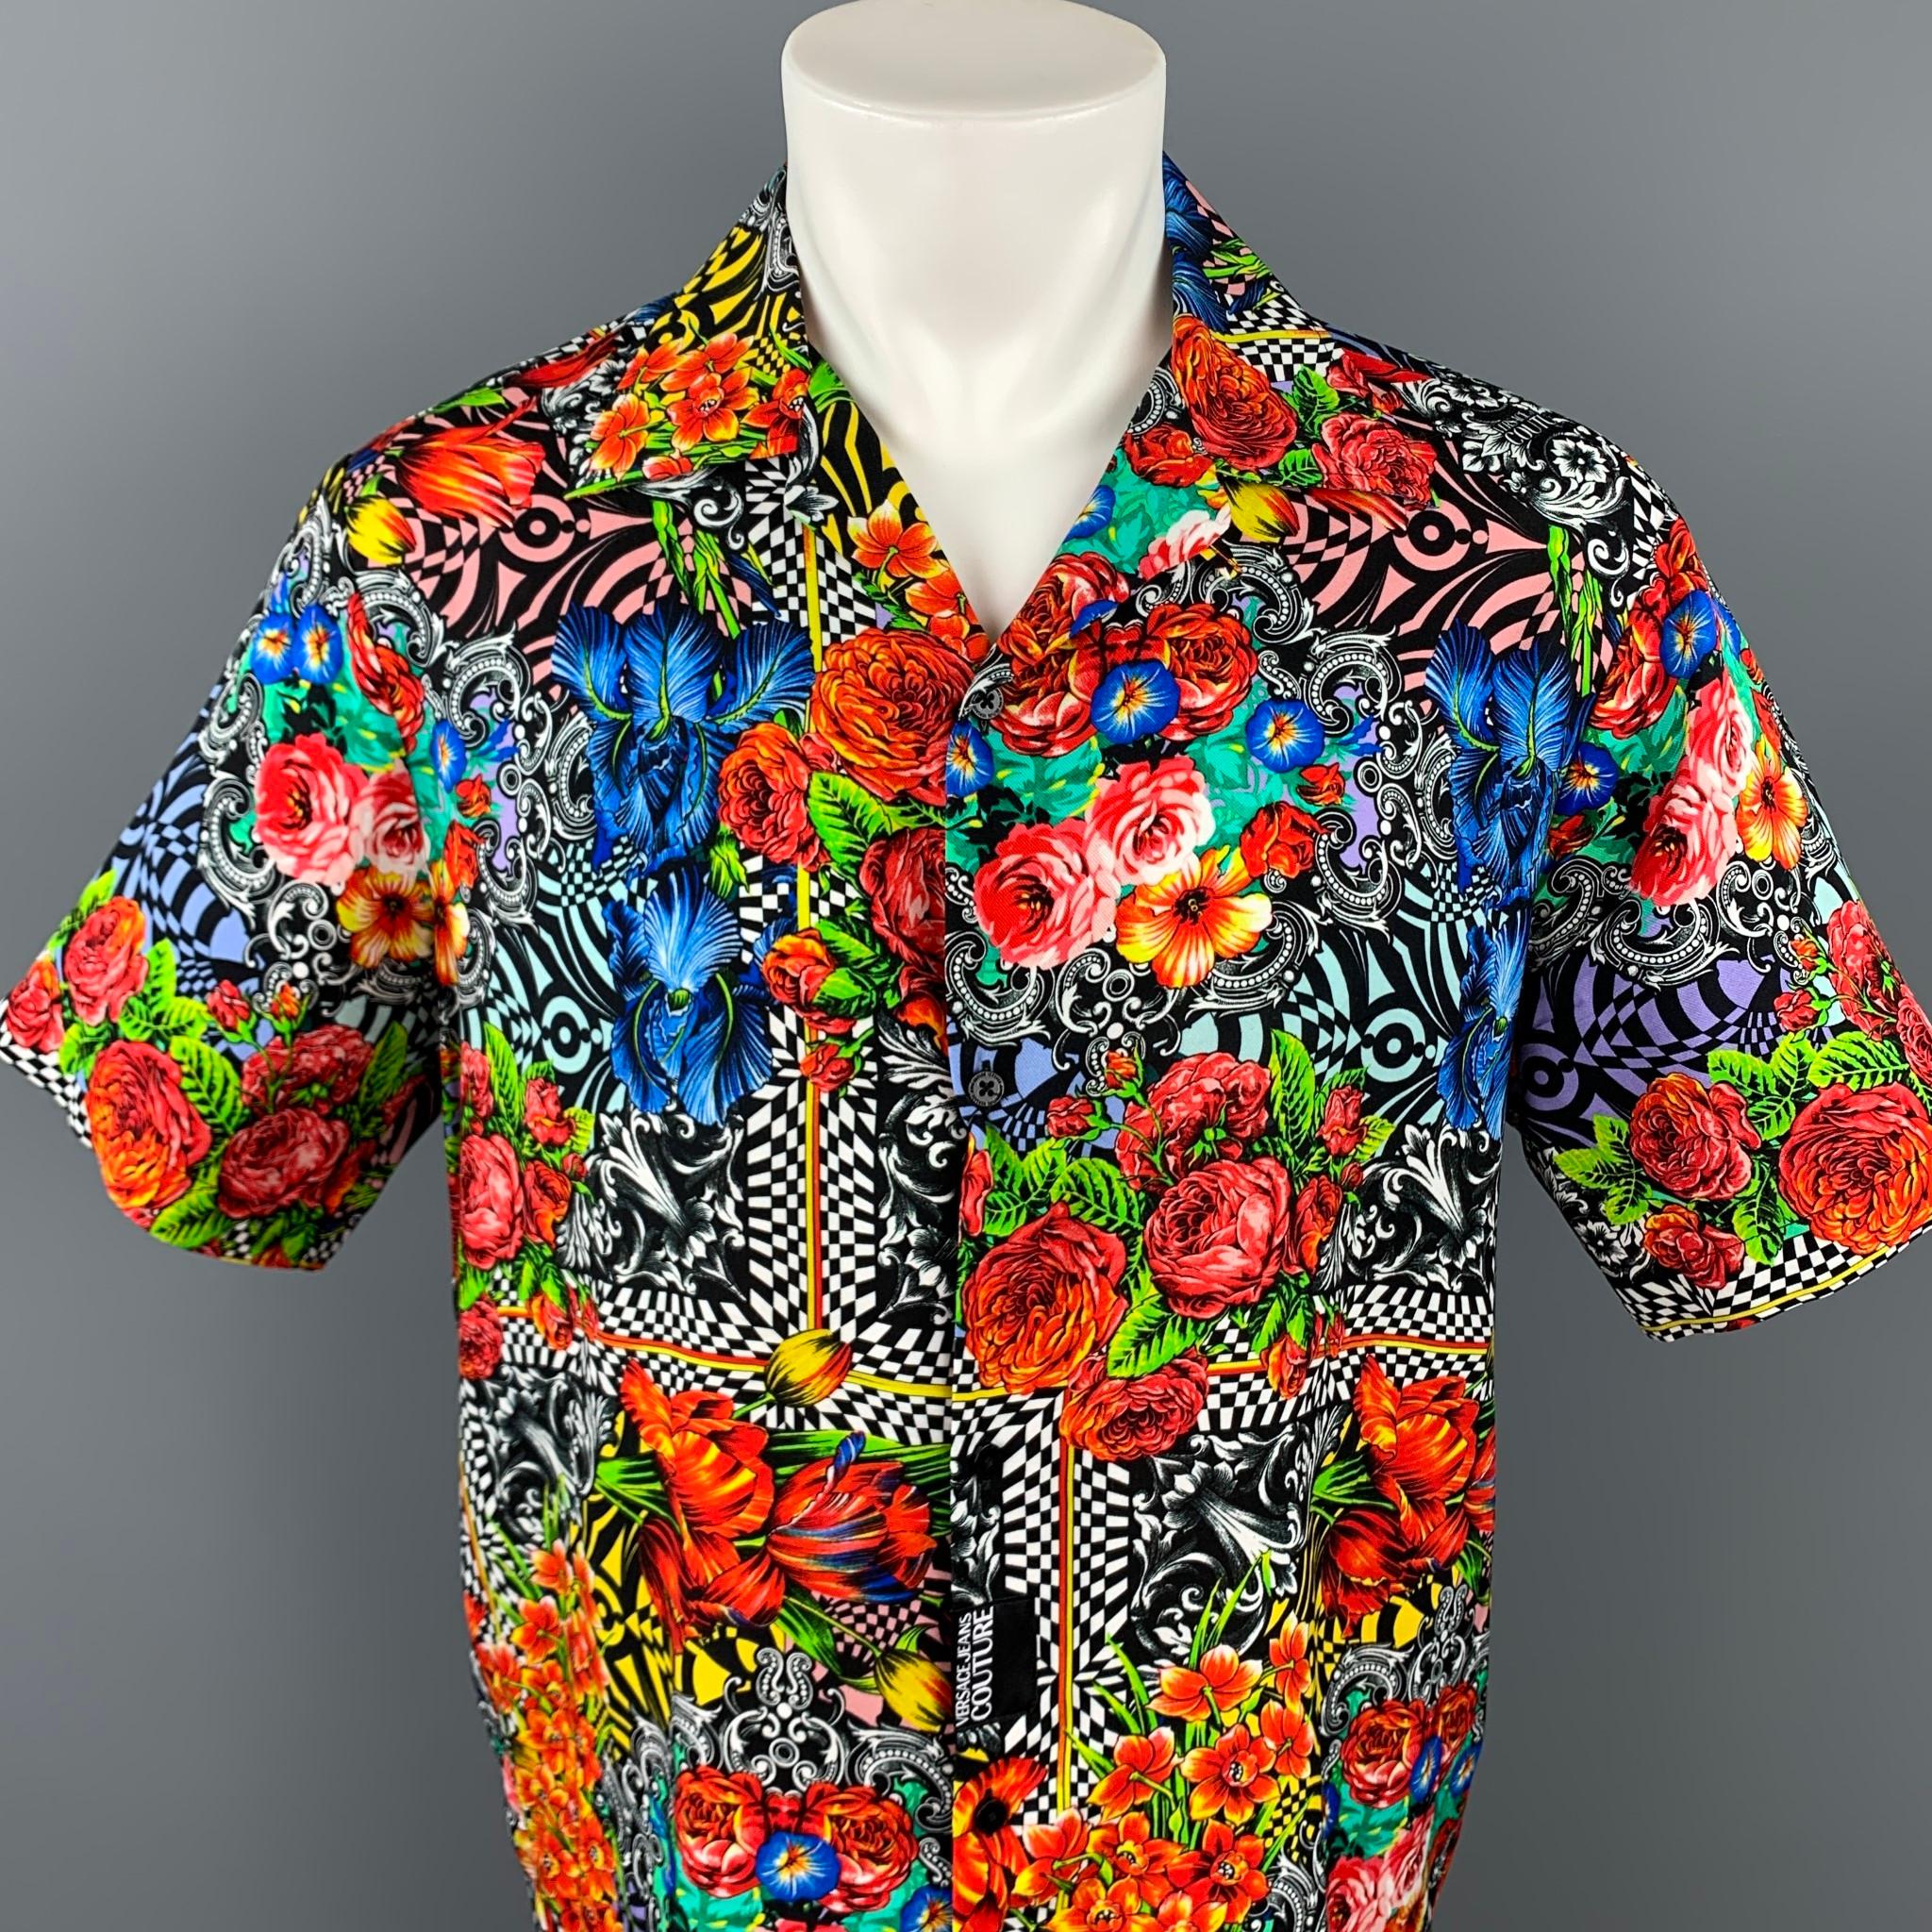 VERSACE JEANS COUTURE short sleeve shirt comes in a multi-color abstract print featuring a camp style and a spread collar. Made in Romania.

New With Tags. 
Marked: S

Measurements:

Shoulder: 19 in.
Chest: 44 in.
Sleeve: 10 in.
Length: 29 in. 